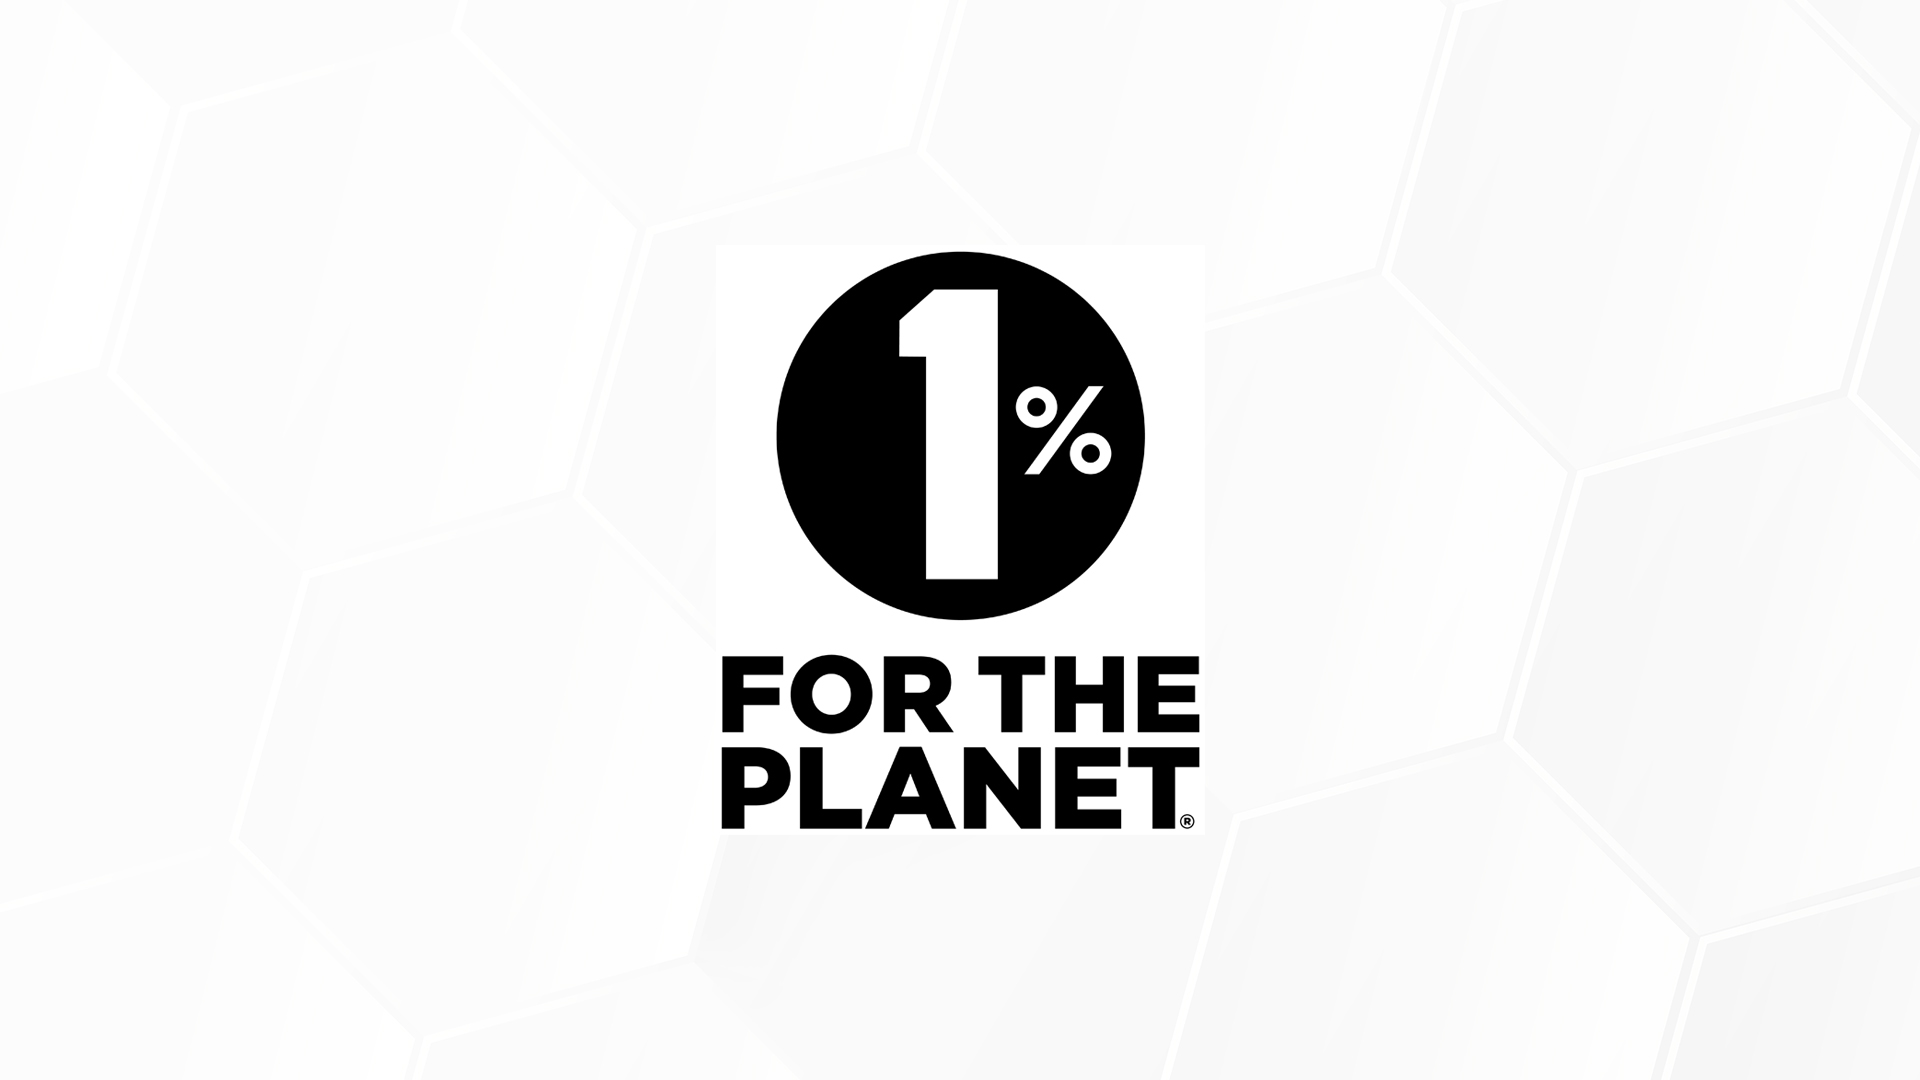 ALLpaQ is Giving Back 1% for the Planet